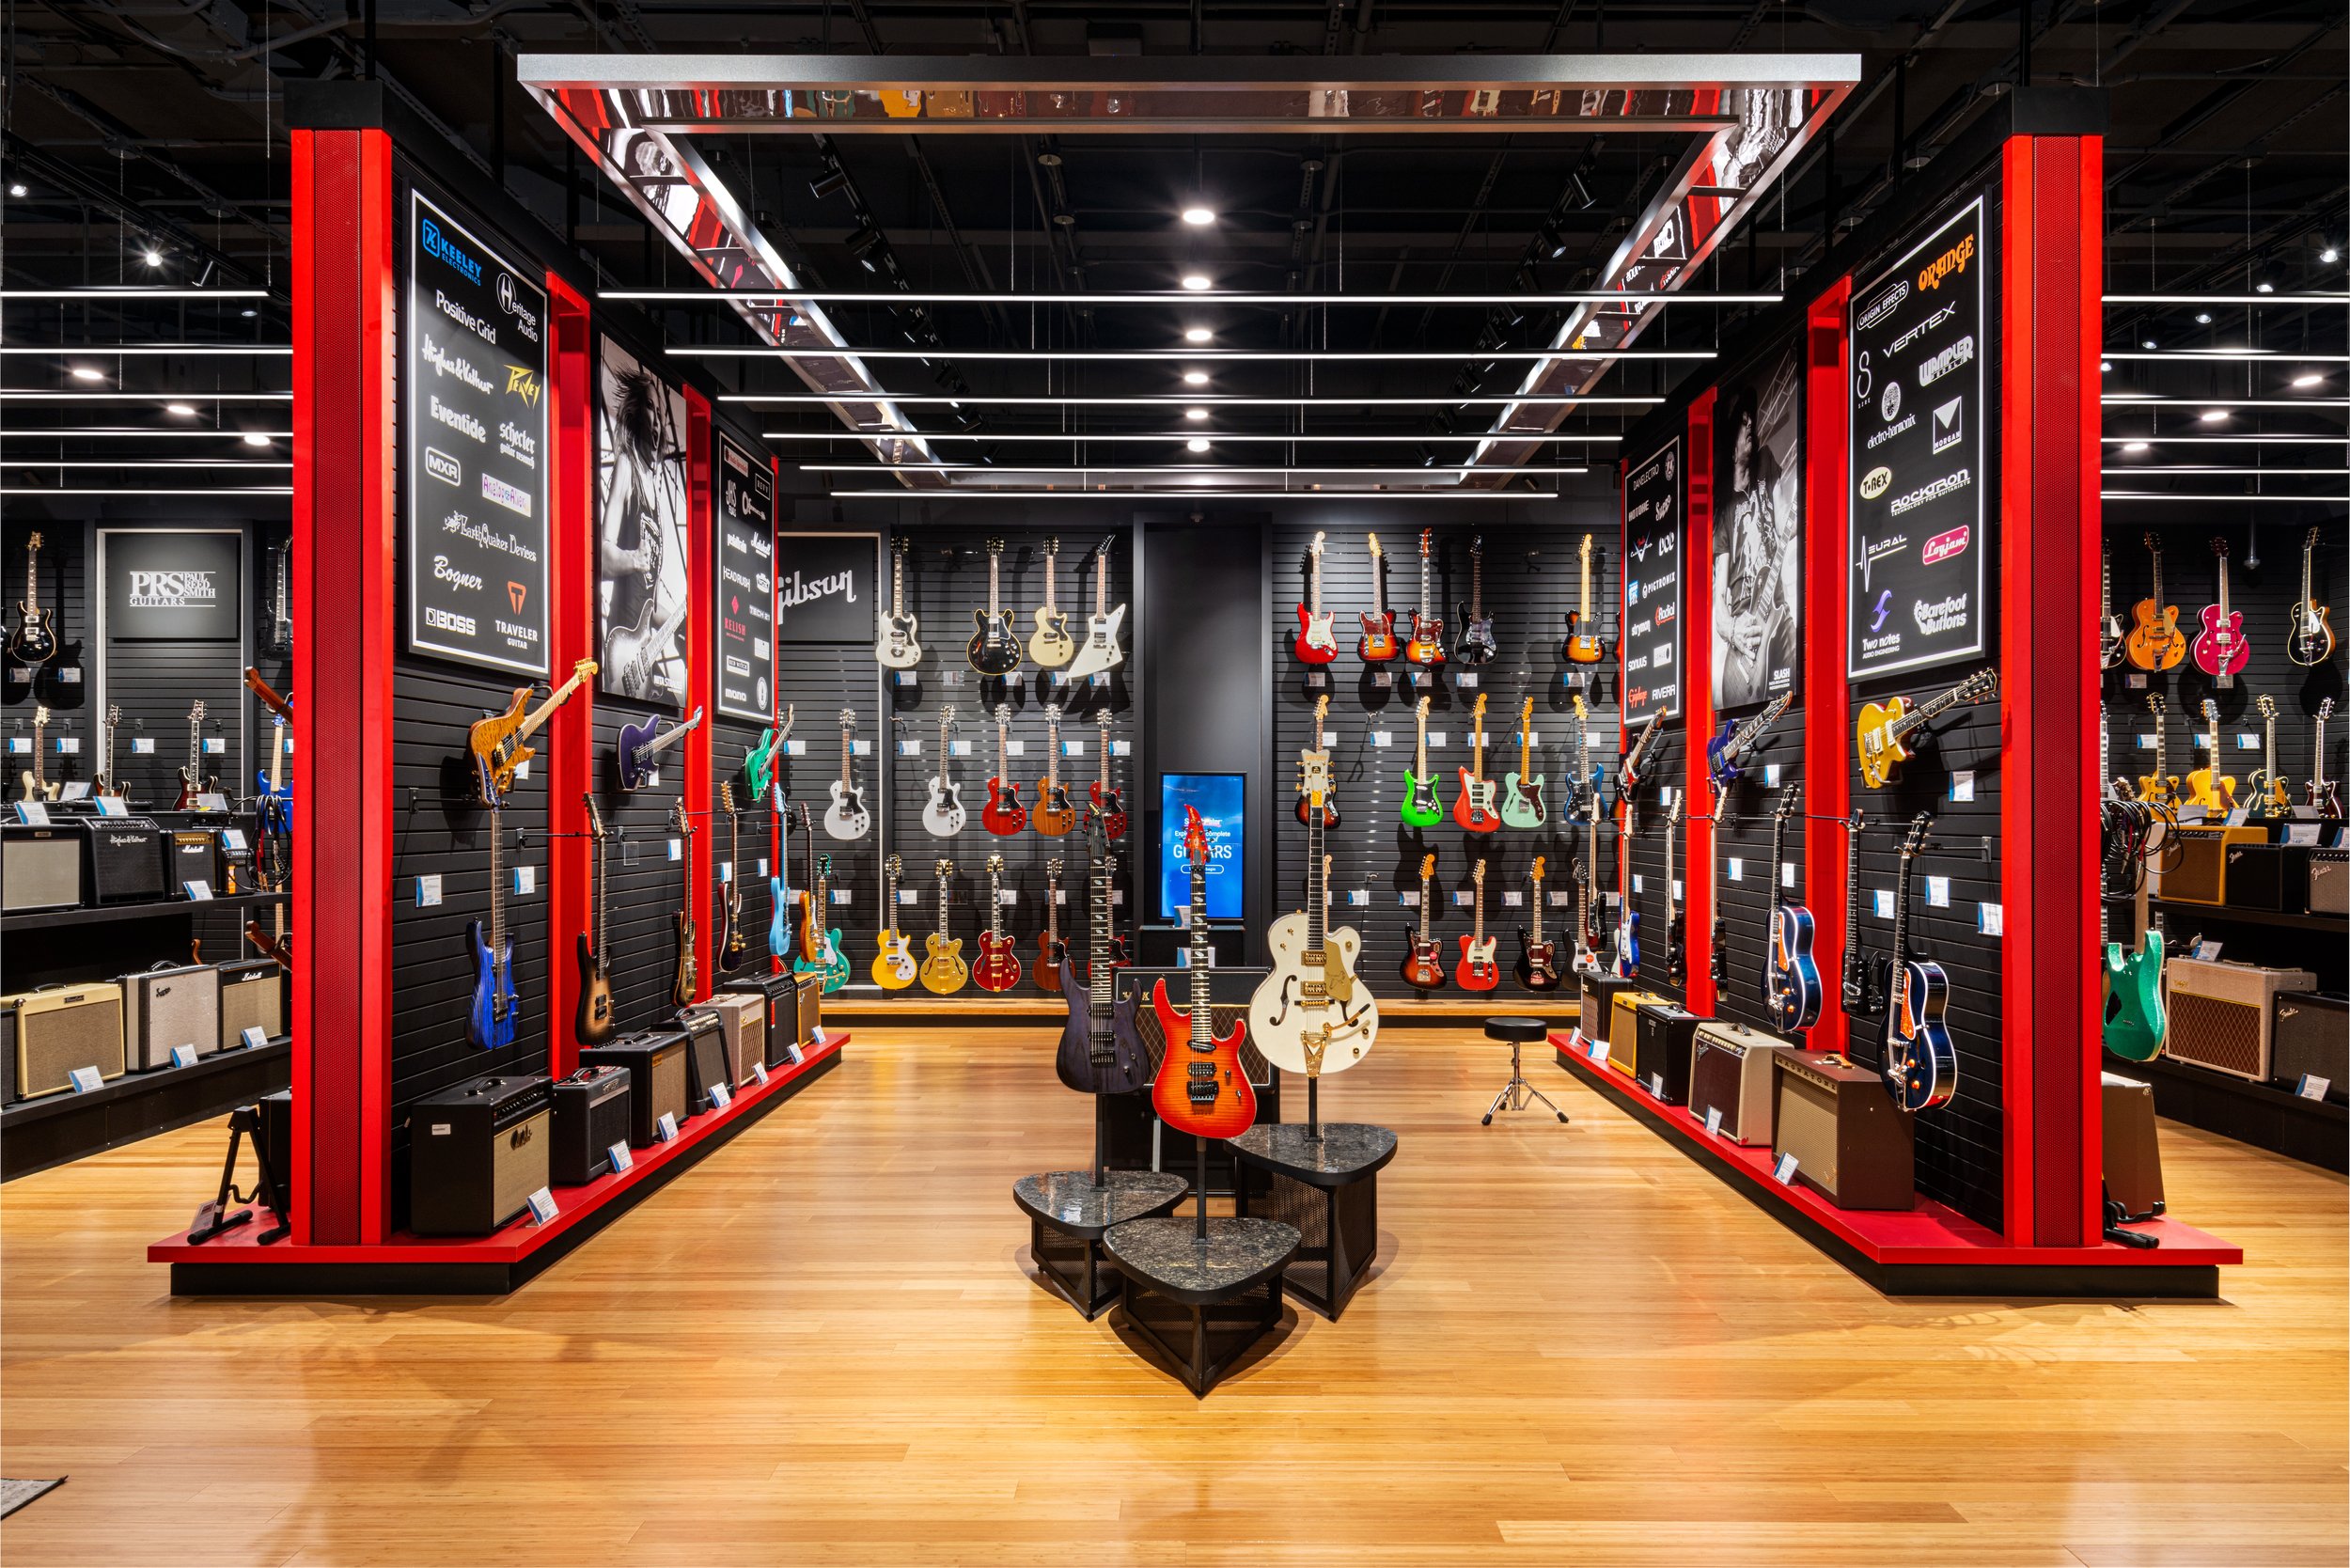 Interior photography of a music shop in Indiana with lots of colorful electric guitars.